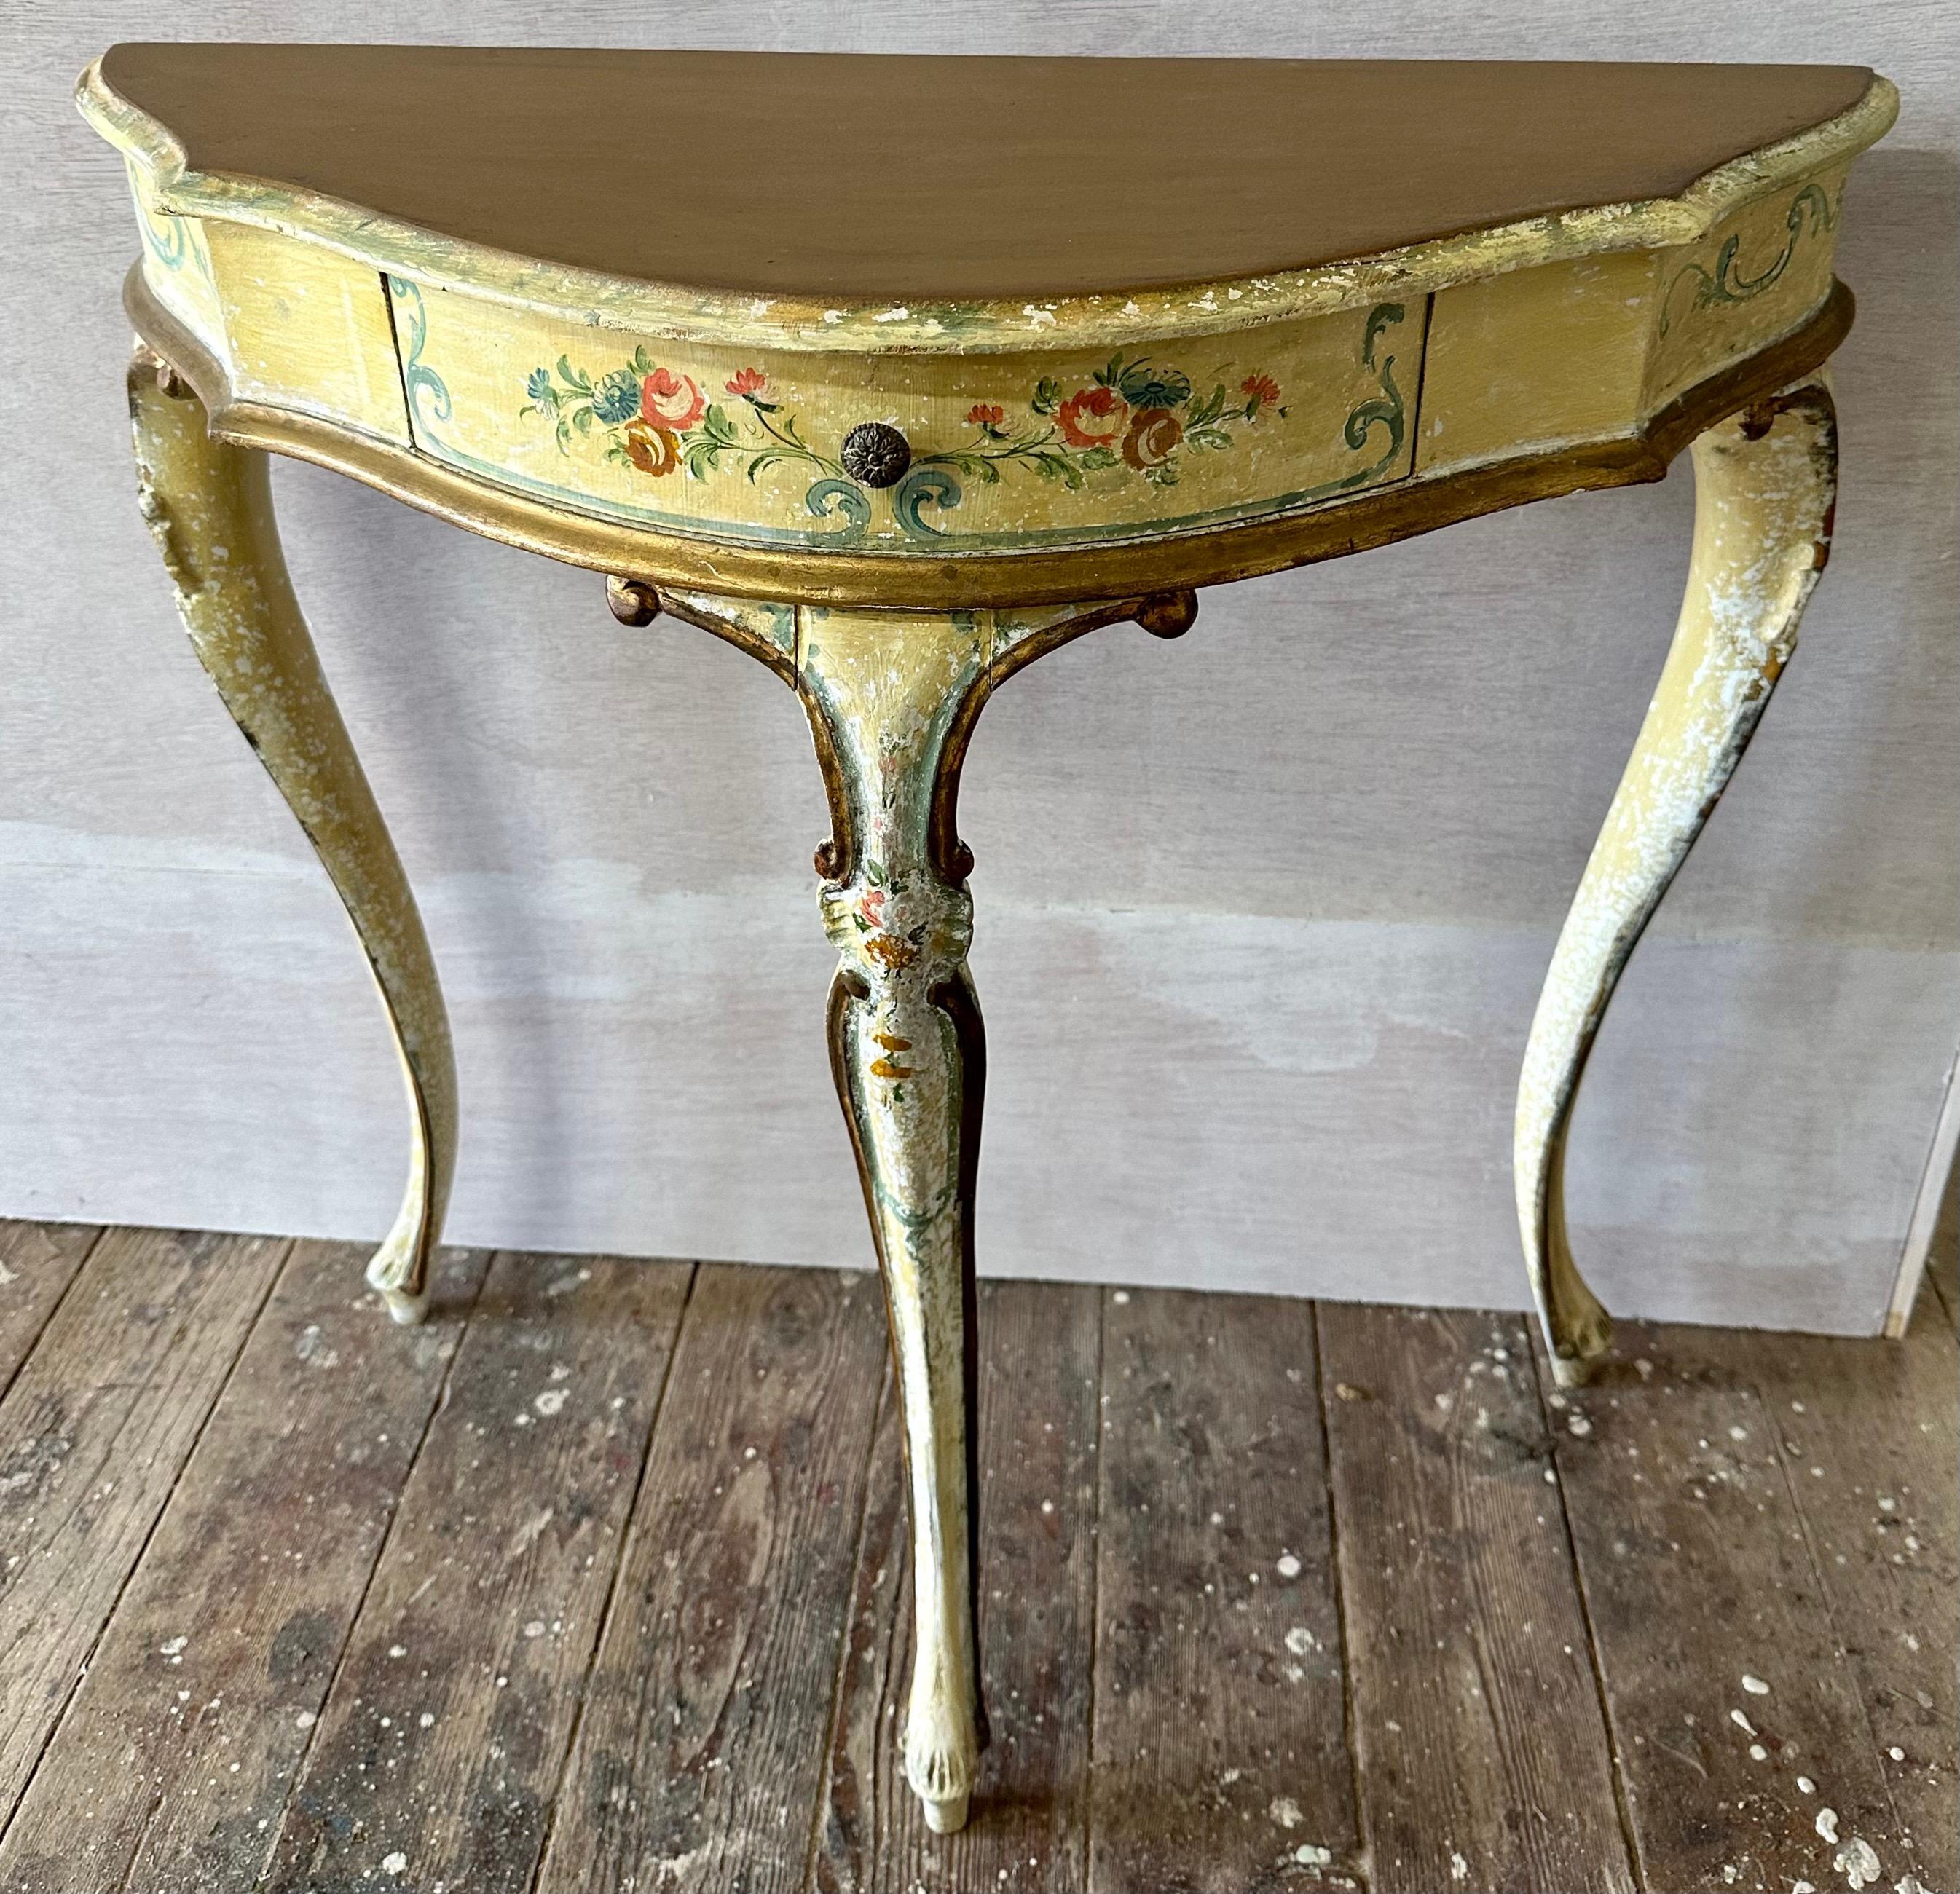 Petitte French Rococo Style Painted Console Table In Good Condition For Sale In Sheffield, MA